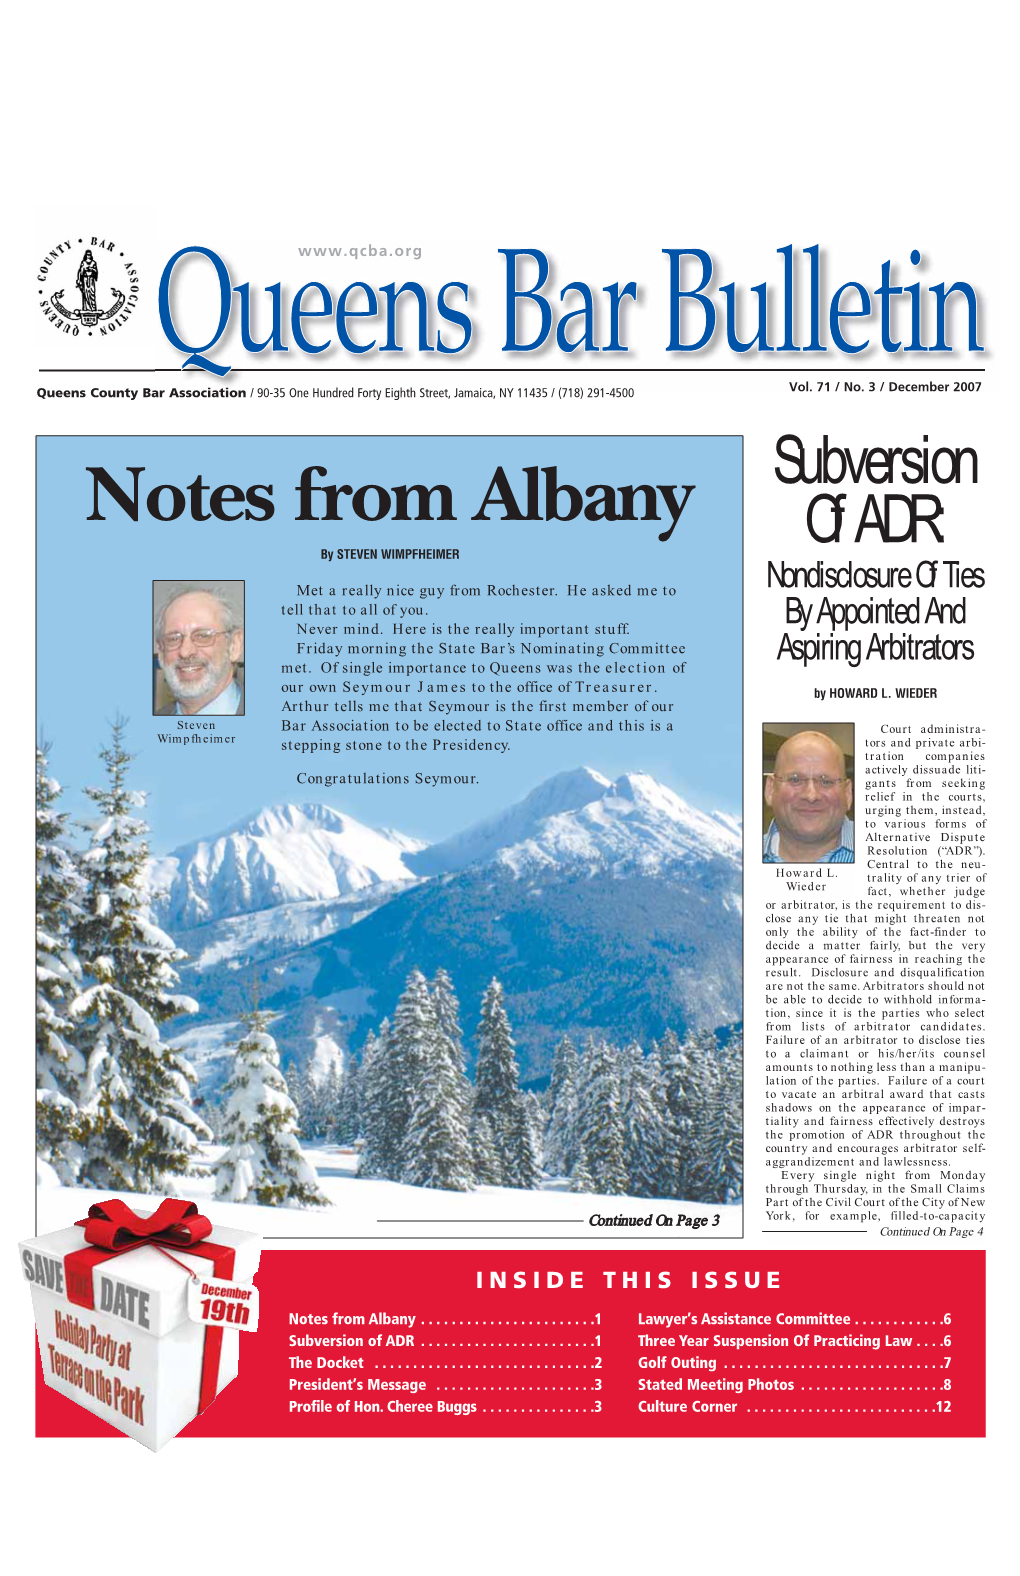 December 2007 Subversion Notes from Albany of ADR: by STEVEN WIMPFHEIMER